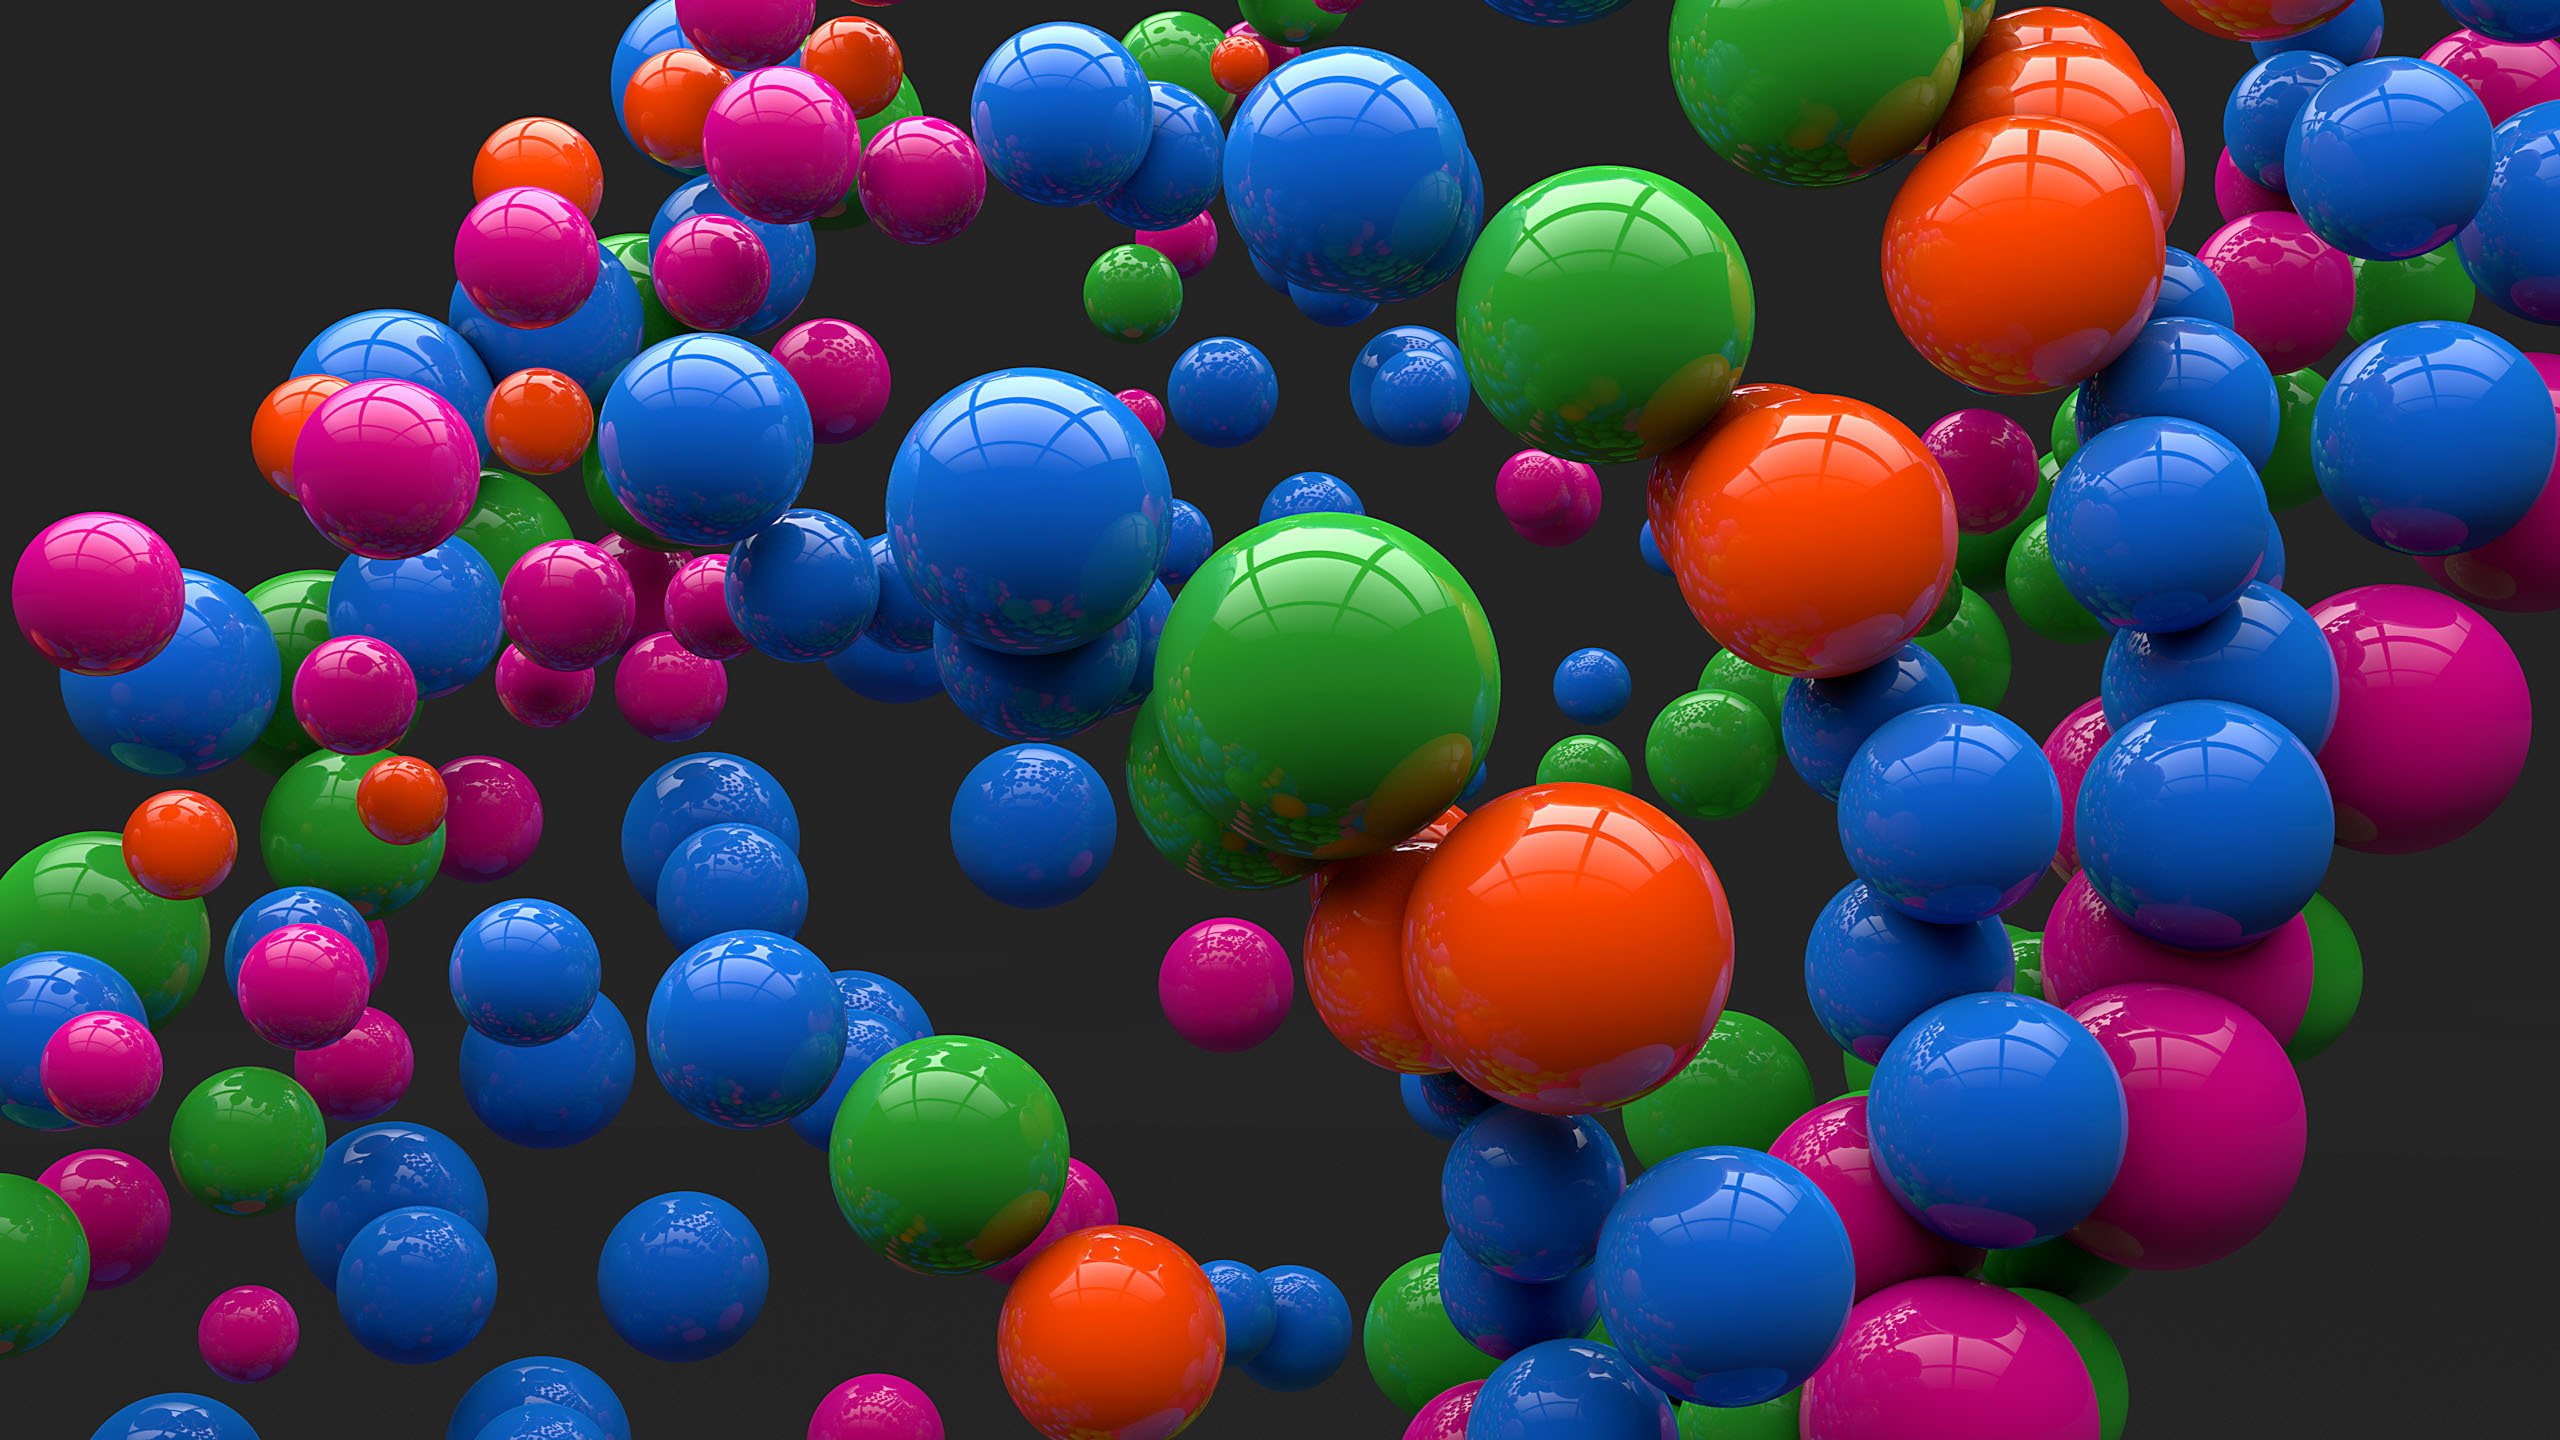 art, Color, Gray, Background, Balls, Spheres, Reflection, Marbles Wallpaper